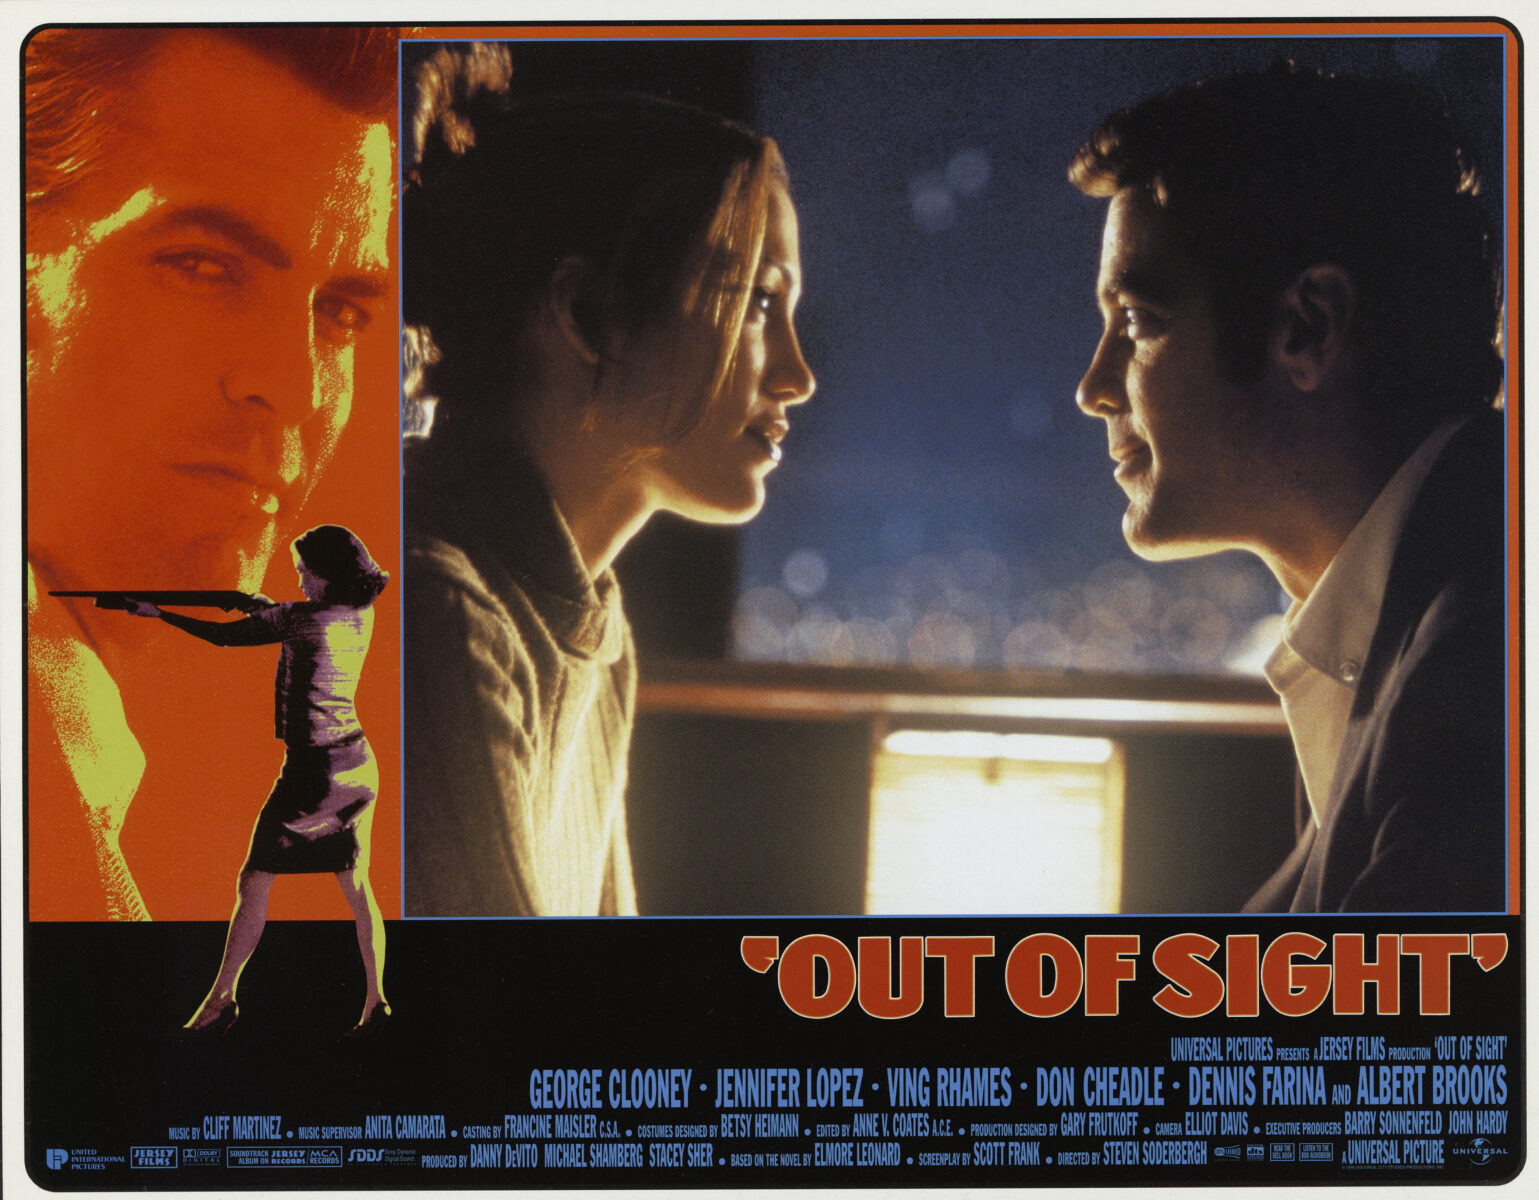 OUT OF SIGHT 8 Soderbergh